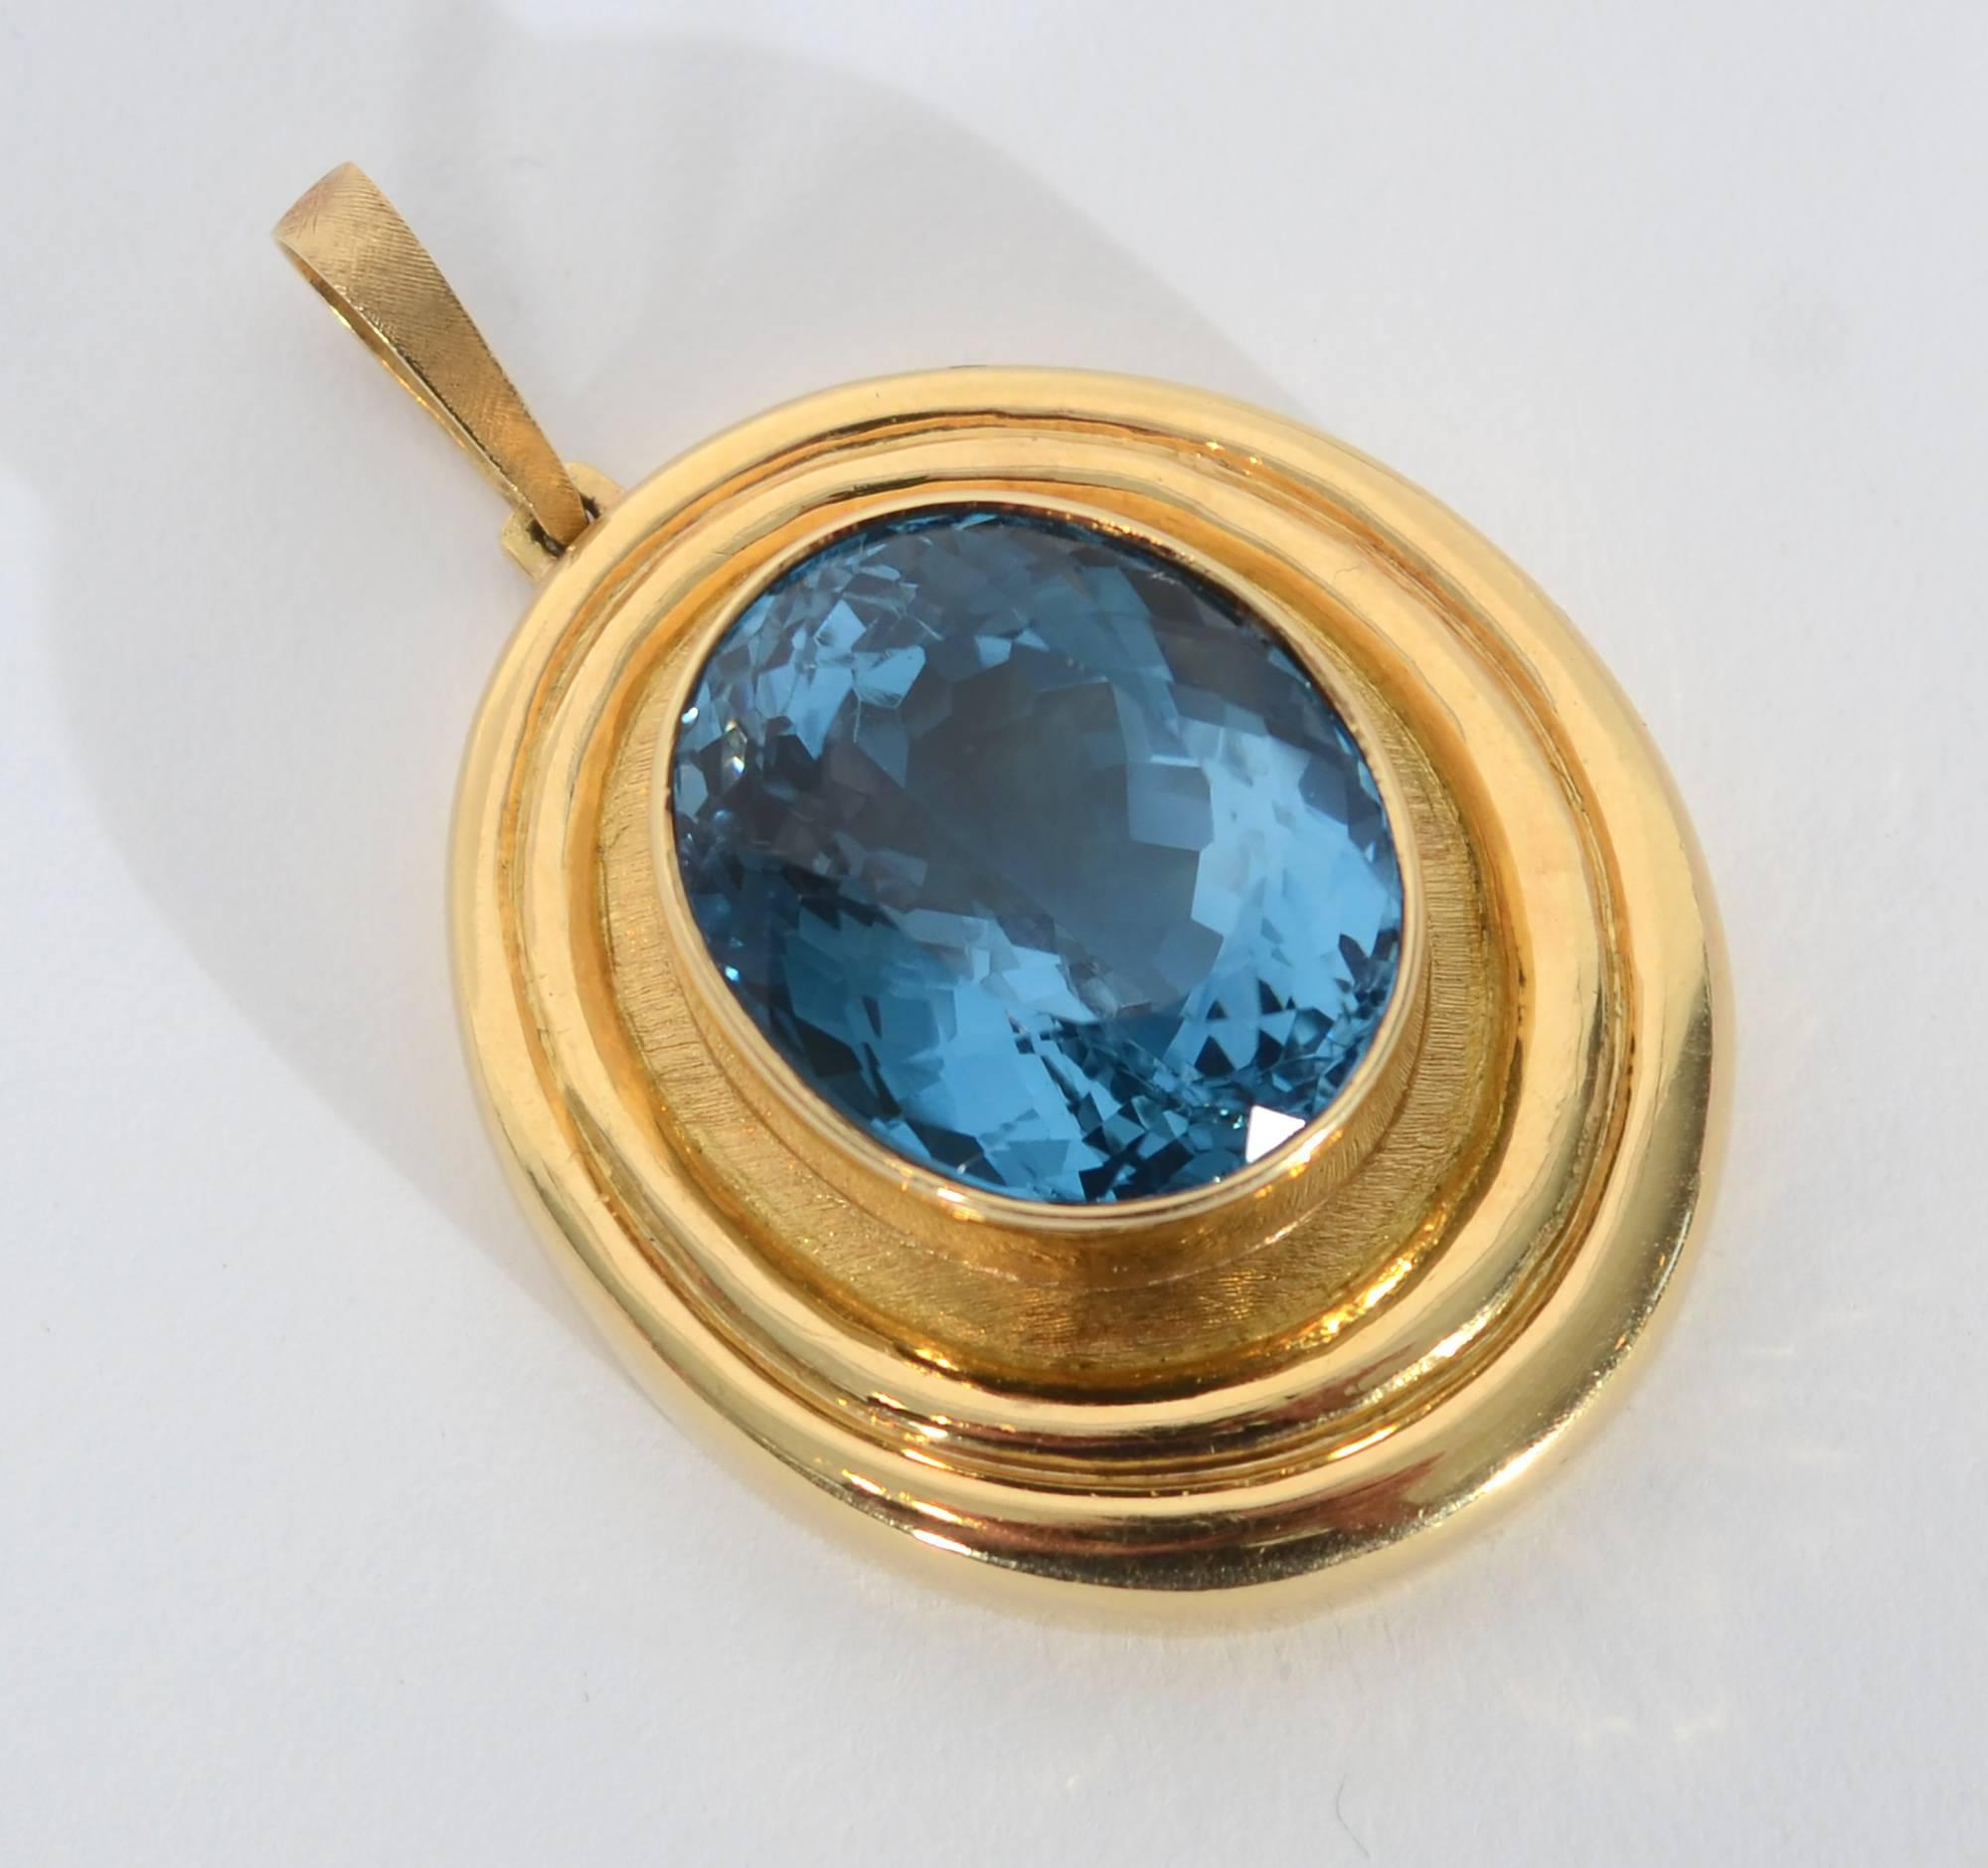 Stunning oval pendant by famed Brazilian brothers, Roberto and Haroldo Burl Marx. The central blue topaz weighs 37 karats.It is set in a glossy bezel surrounded by a slightly burnished oval. Outside that are two glossy ribbed frames. The variation